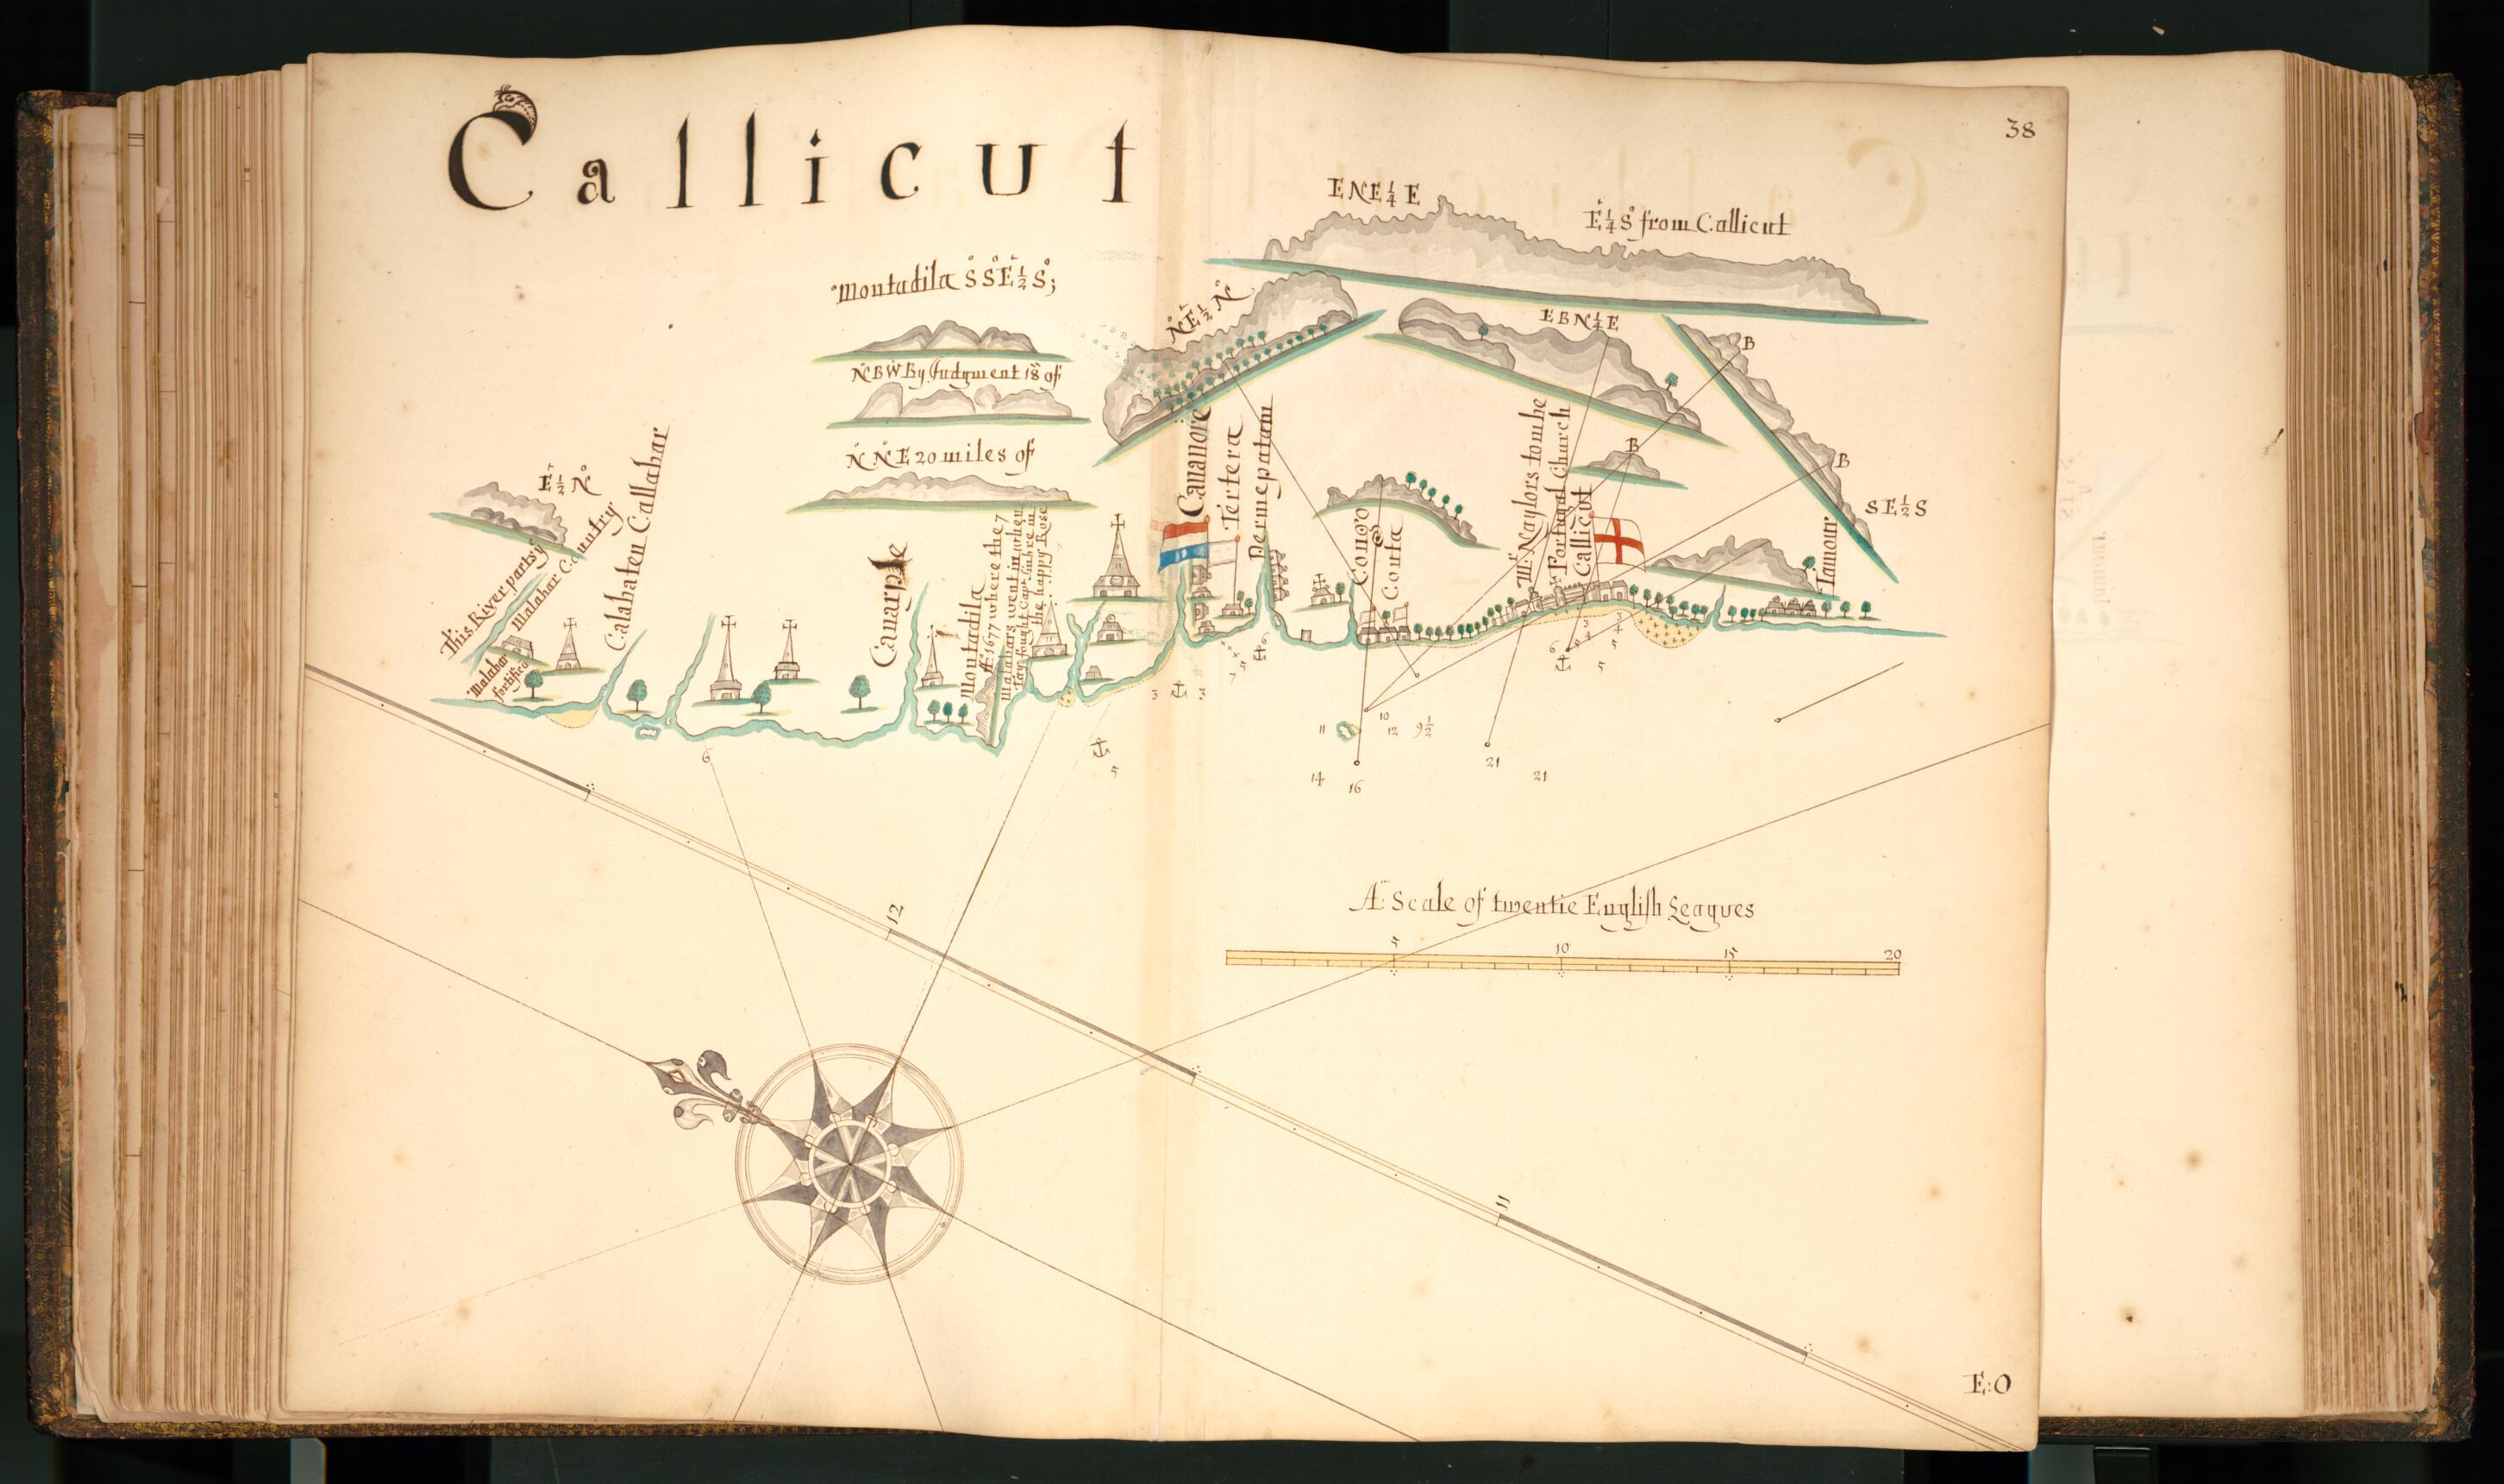 This old map of 38) Callicut from Buccaneer Atlas from 1690 was created by William Hacke in 1690